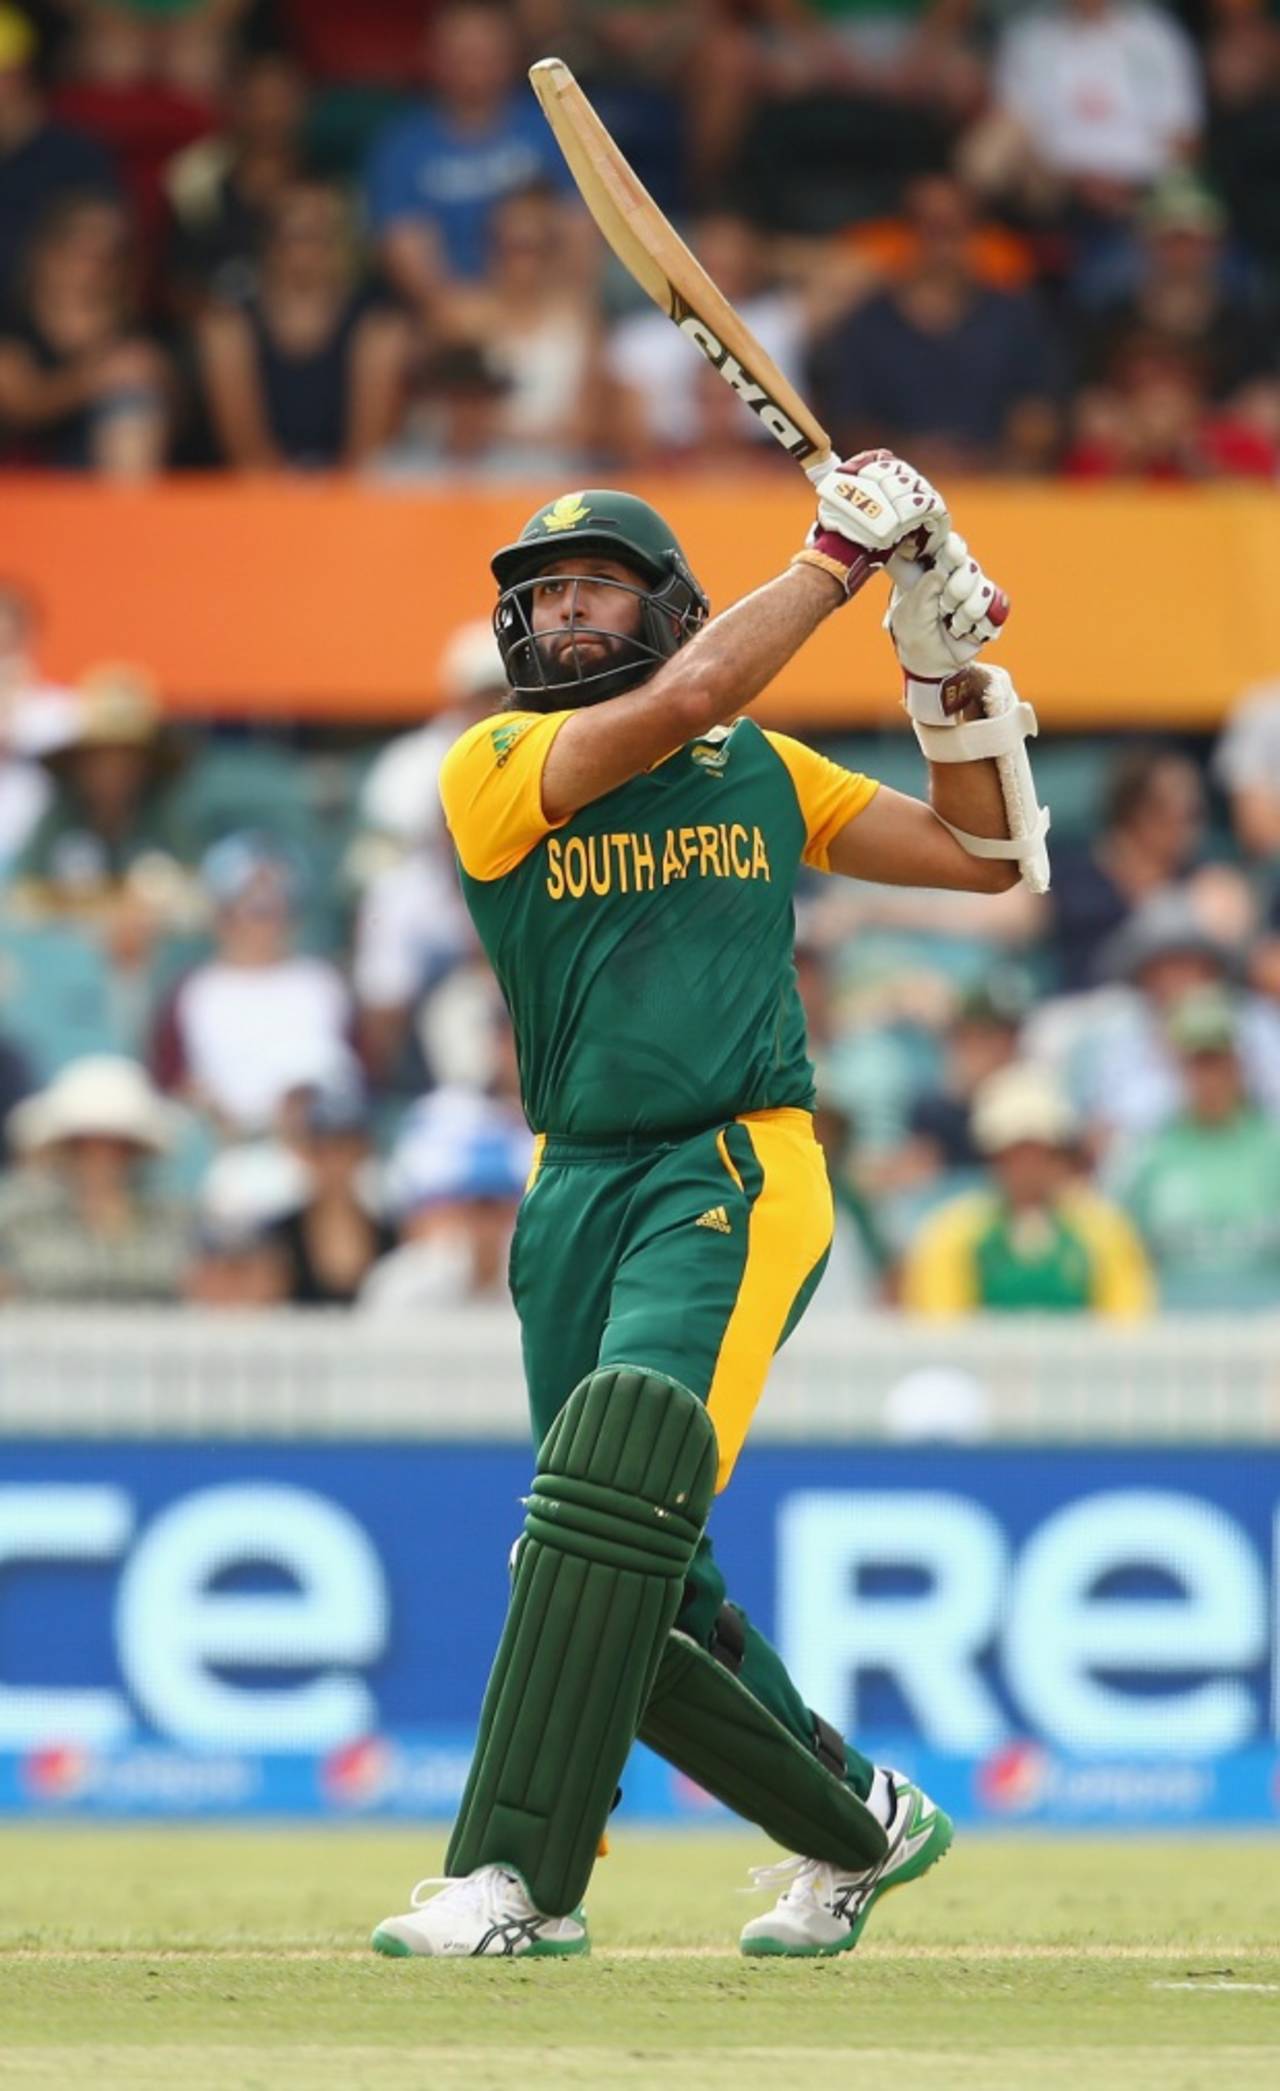 Hashim Amla became the fastest to 20 ODI centuries, Ireland v South Africa, World Cup 2015, Group B, Canberra, March 3, 2015